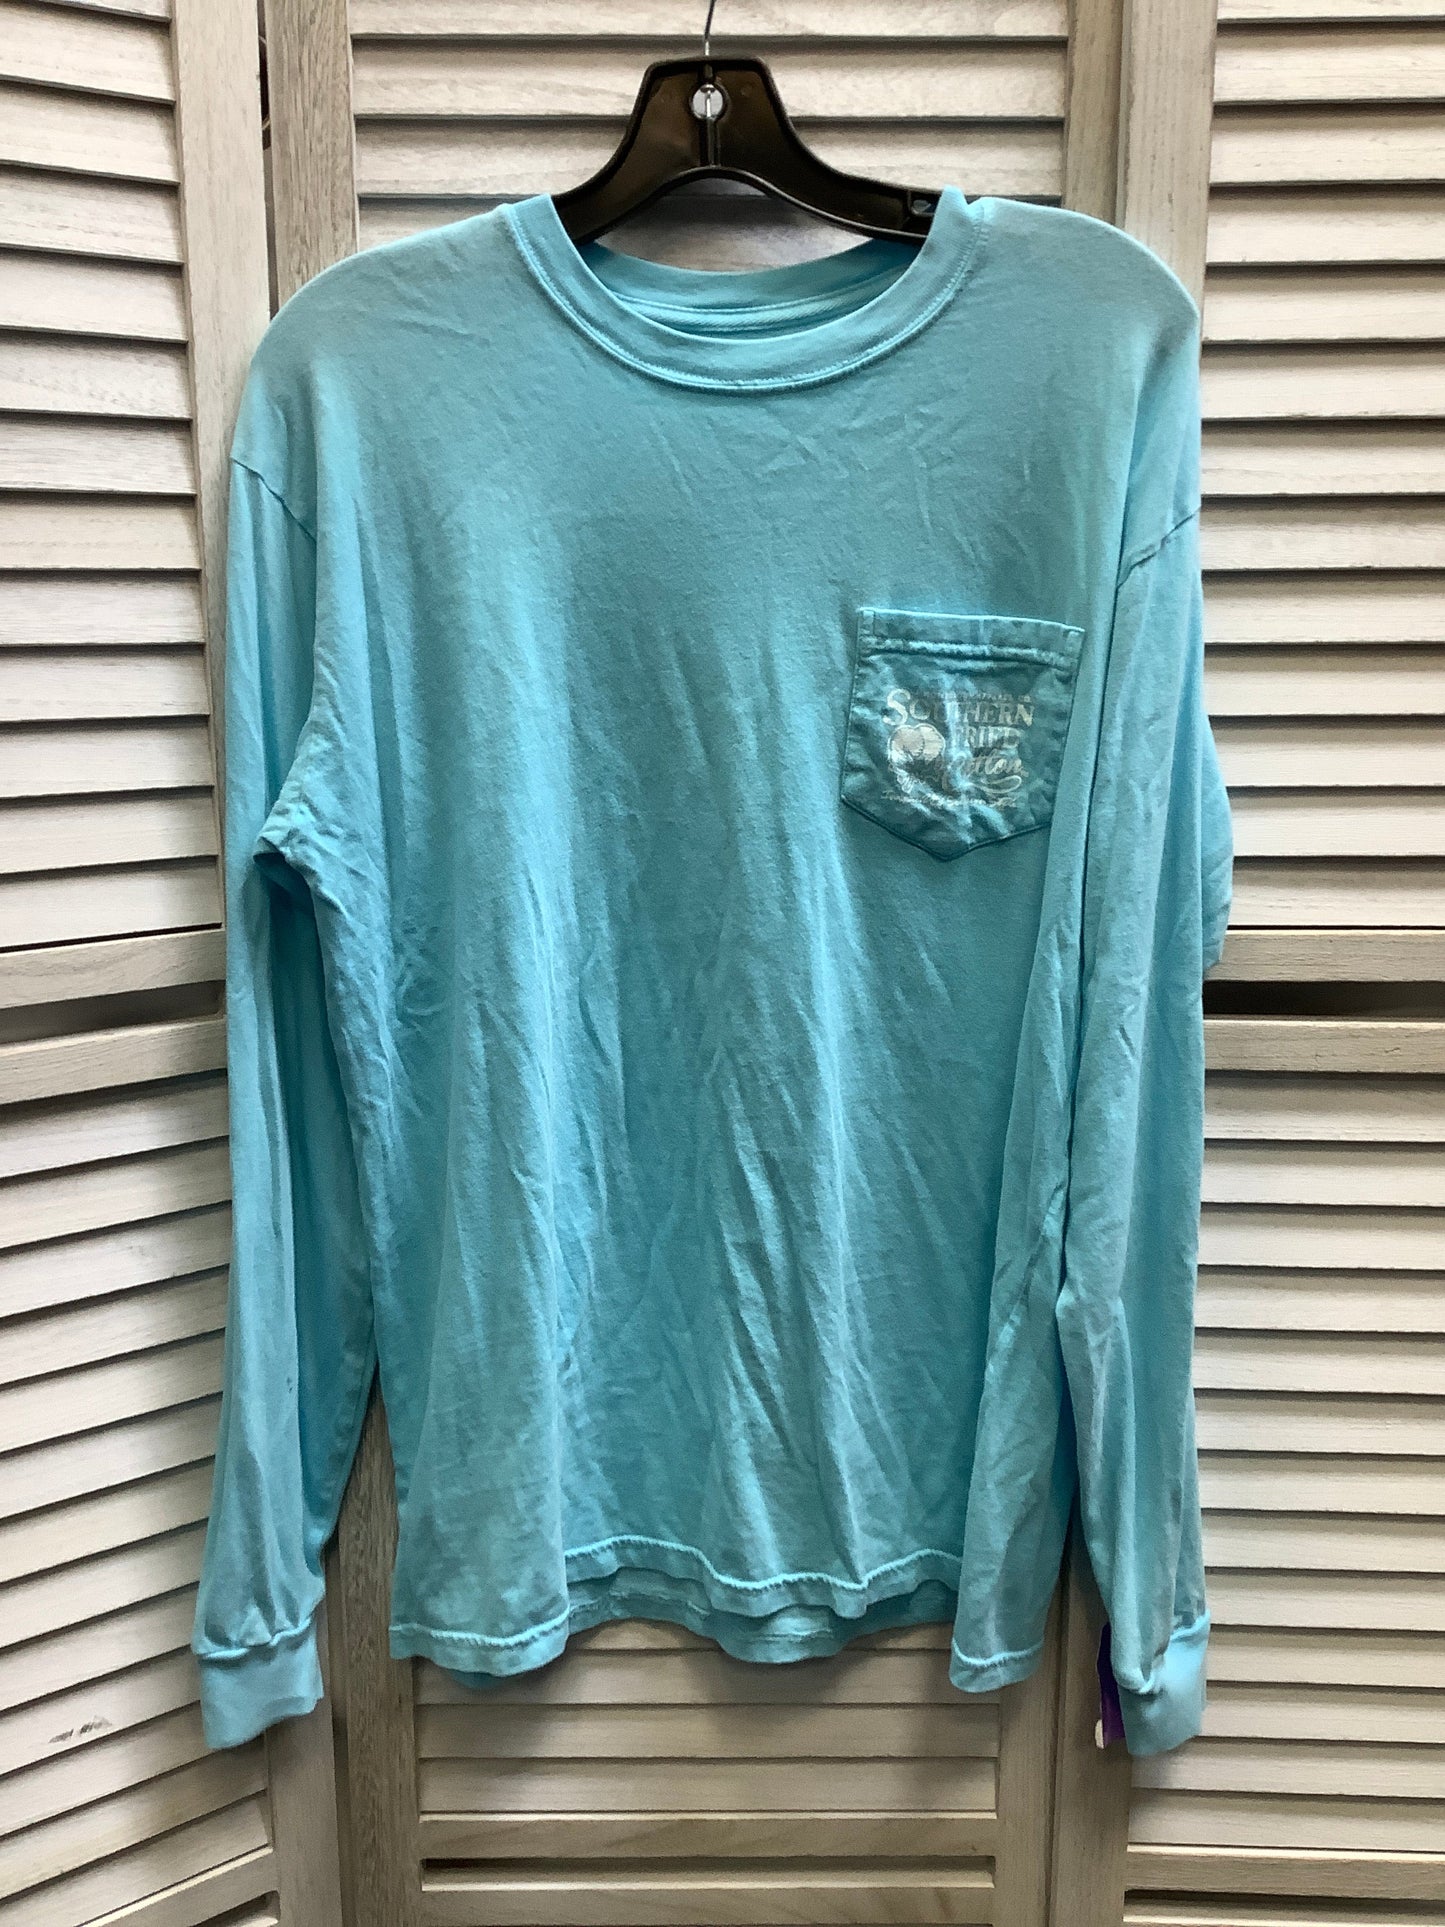 Blue Top Long Sleeve Simply Southern, Size M